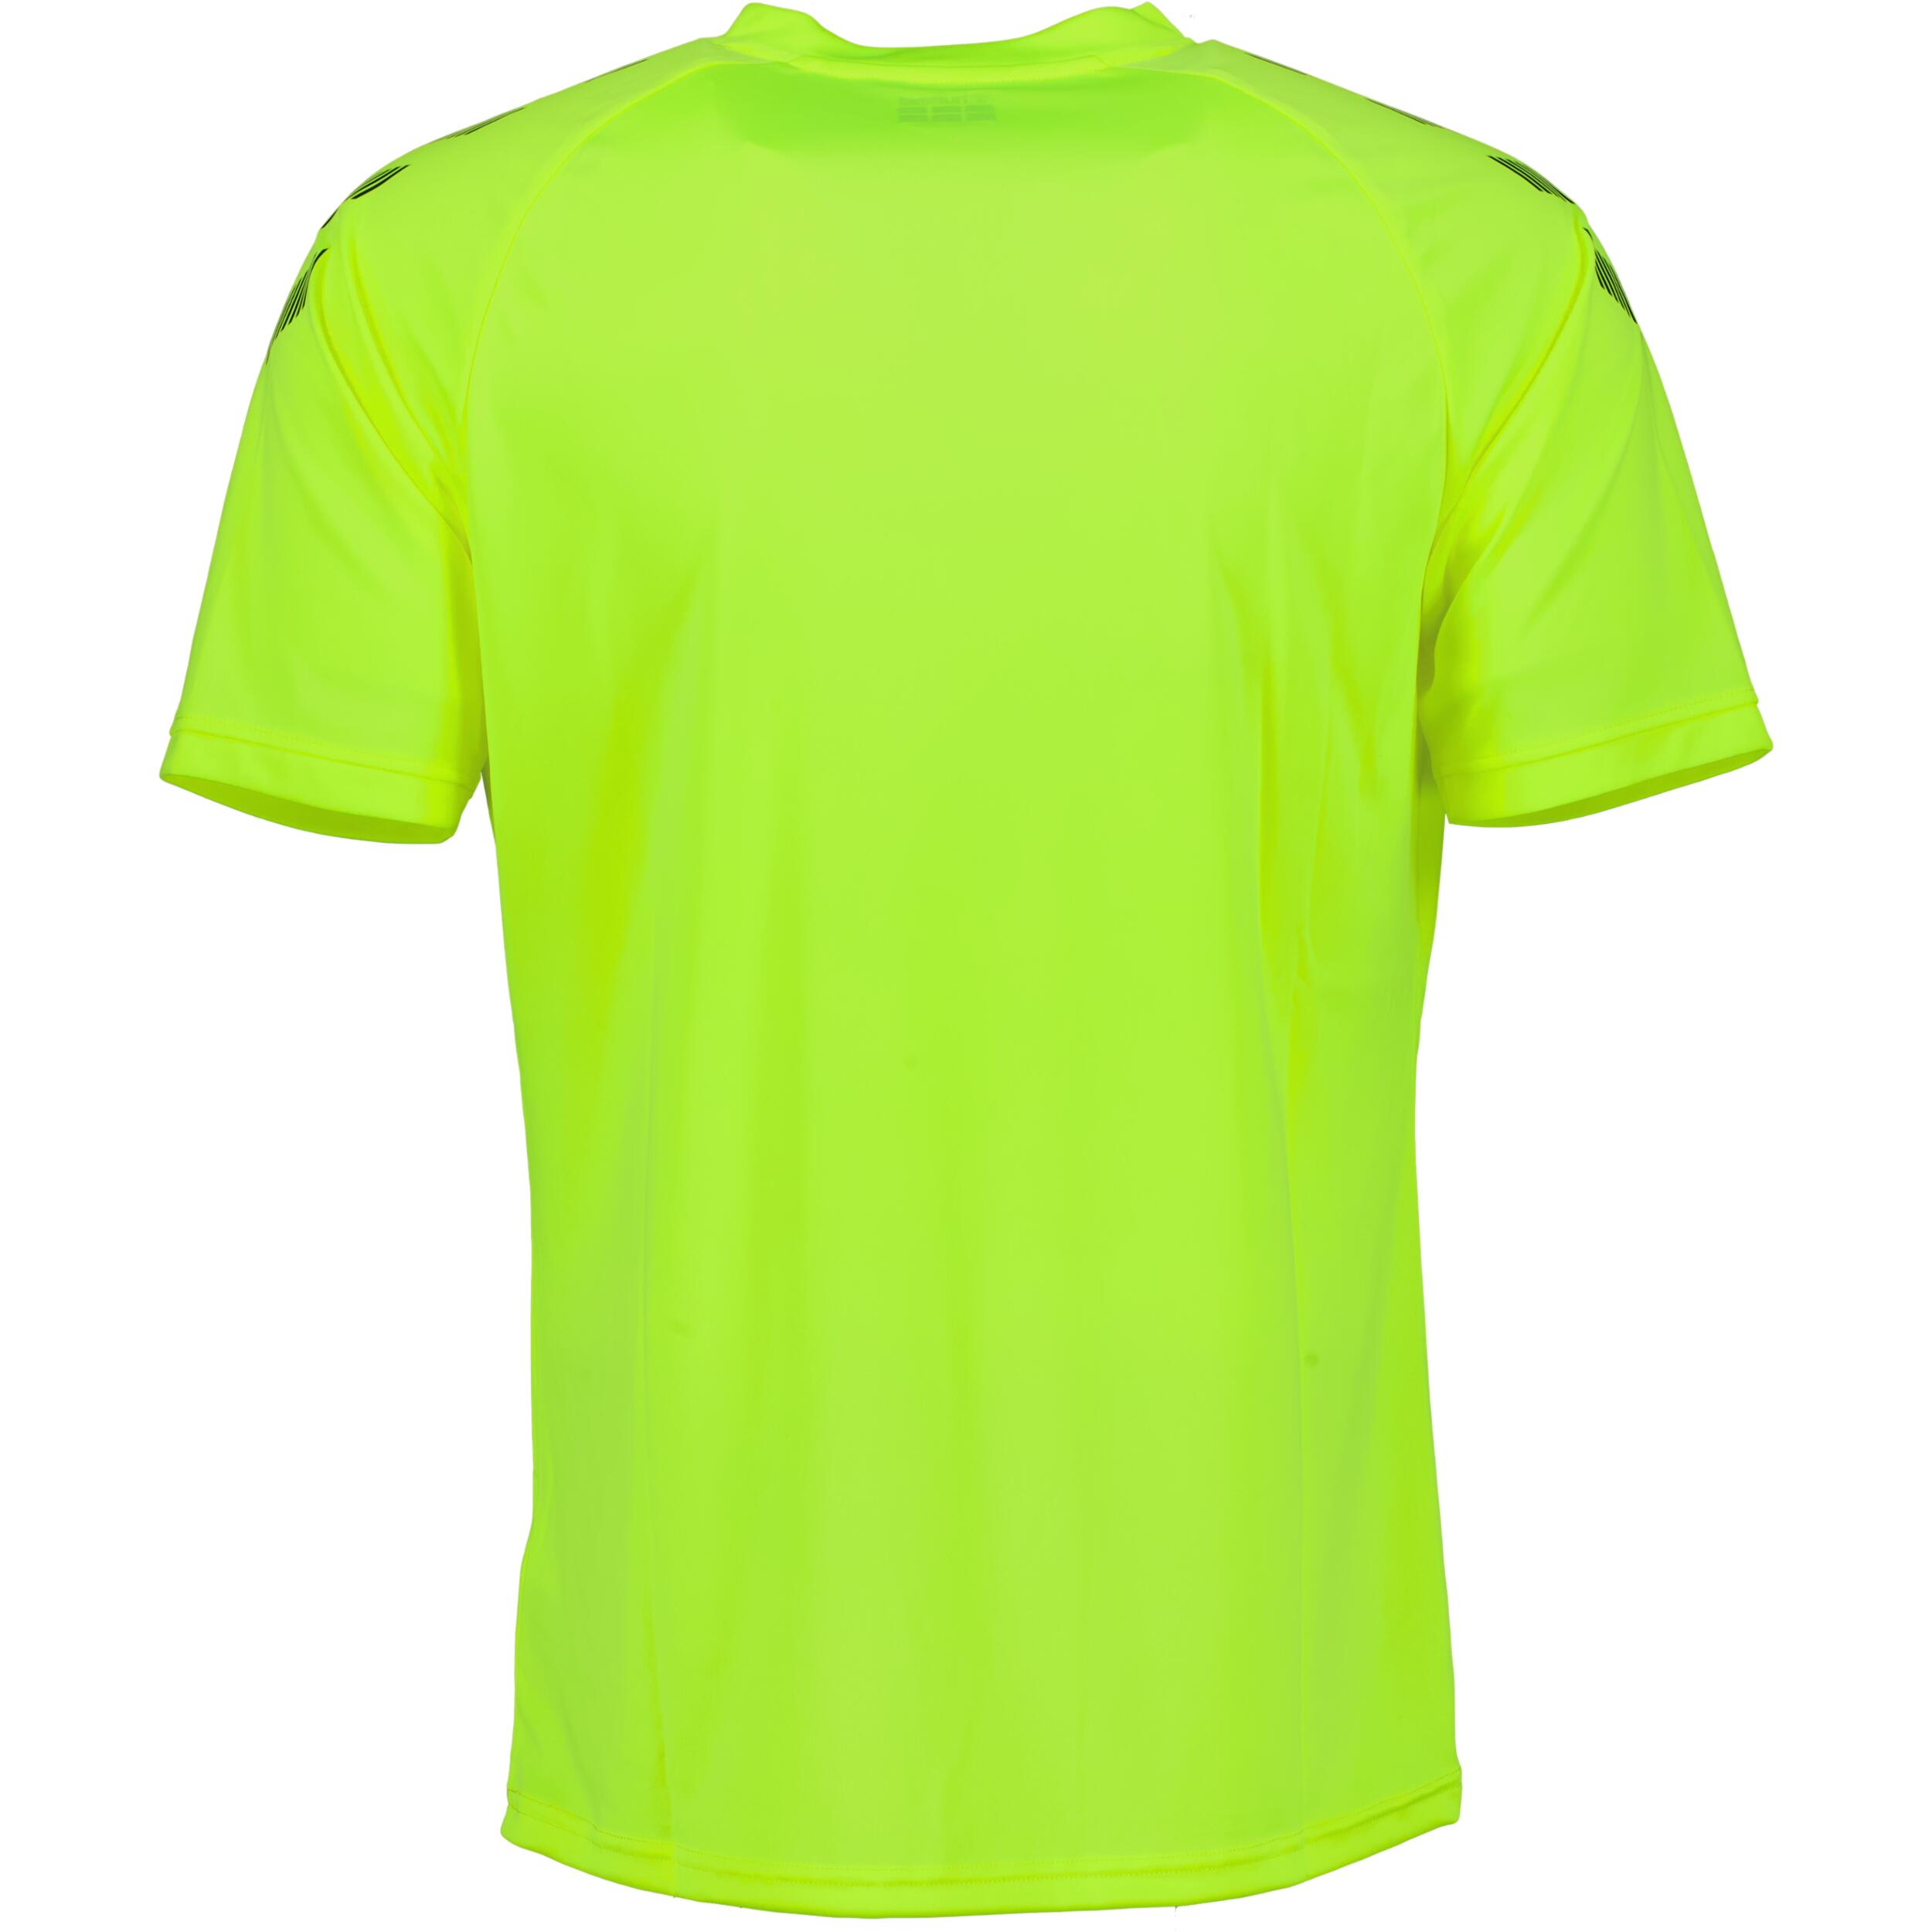 Poly jersey for kids, great for football, in safety yellow 2/3